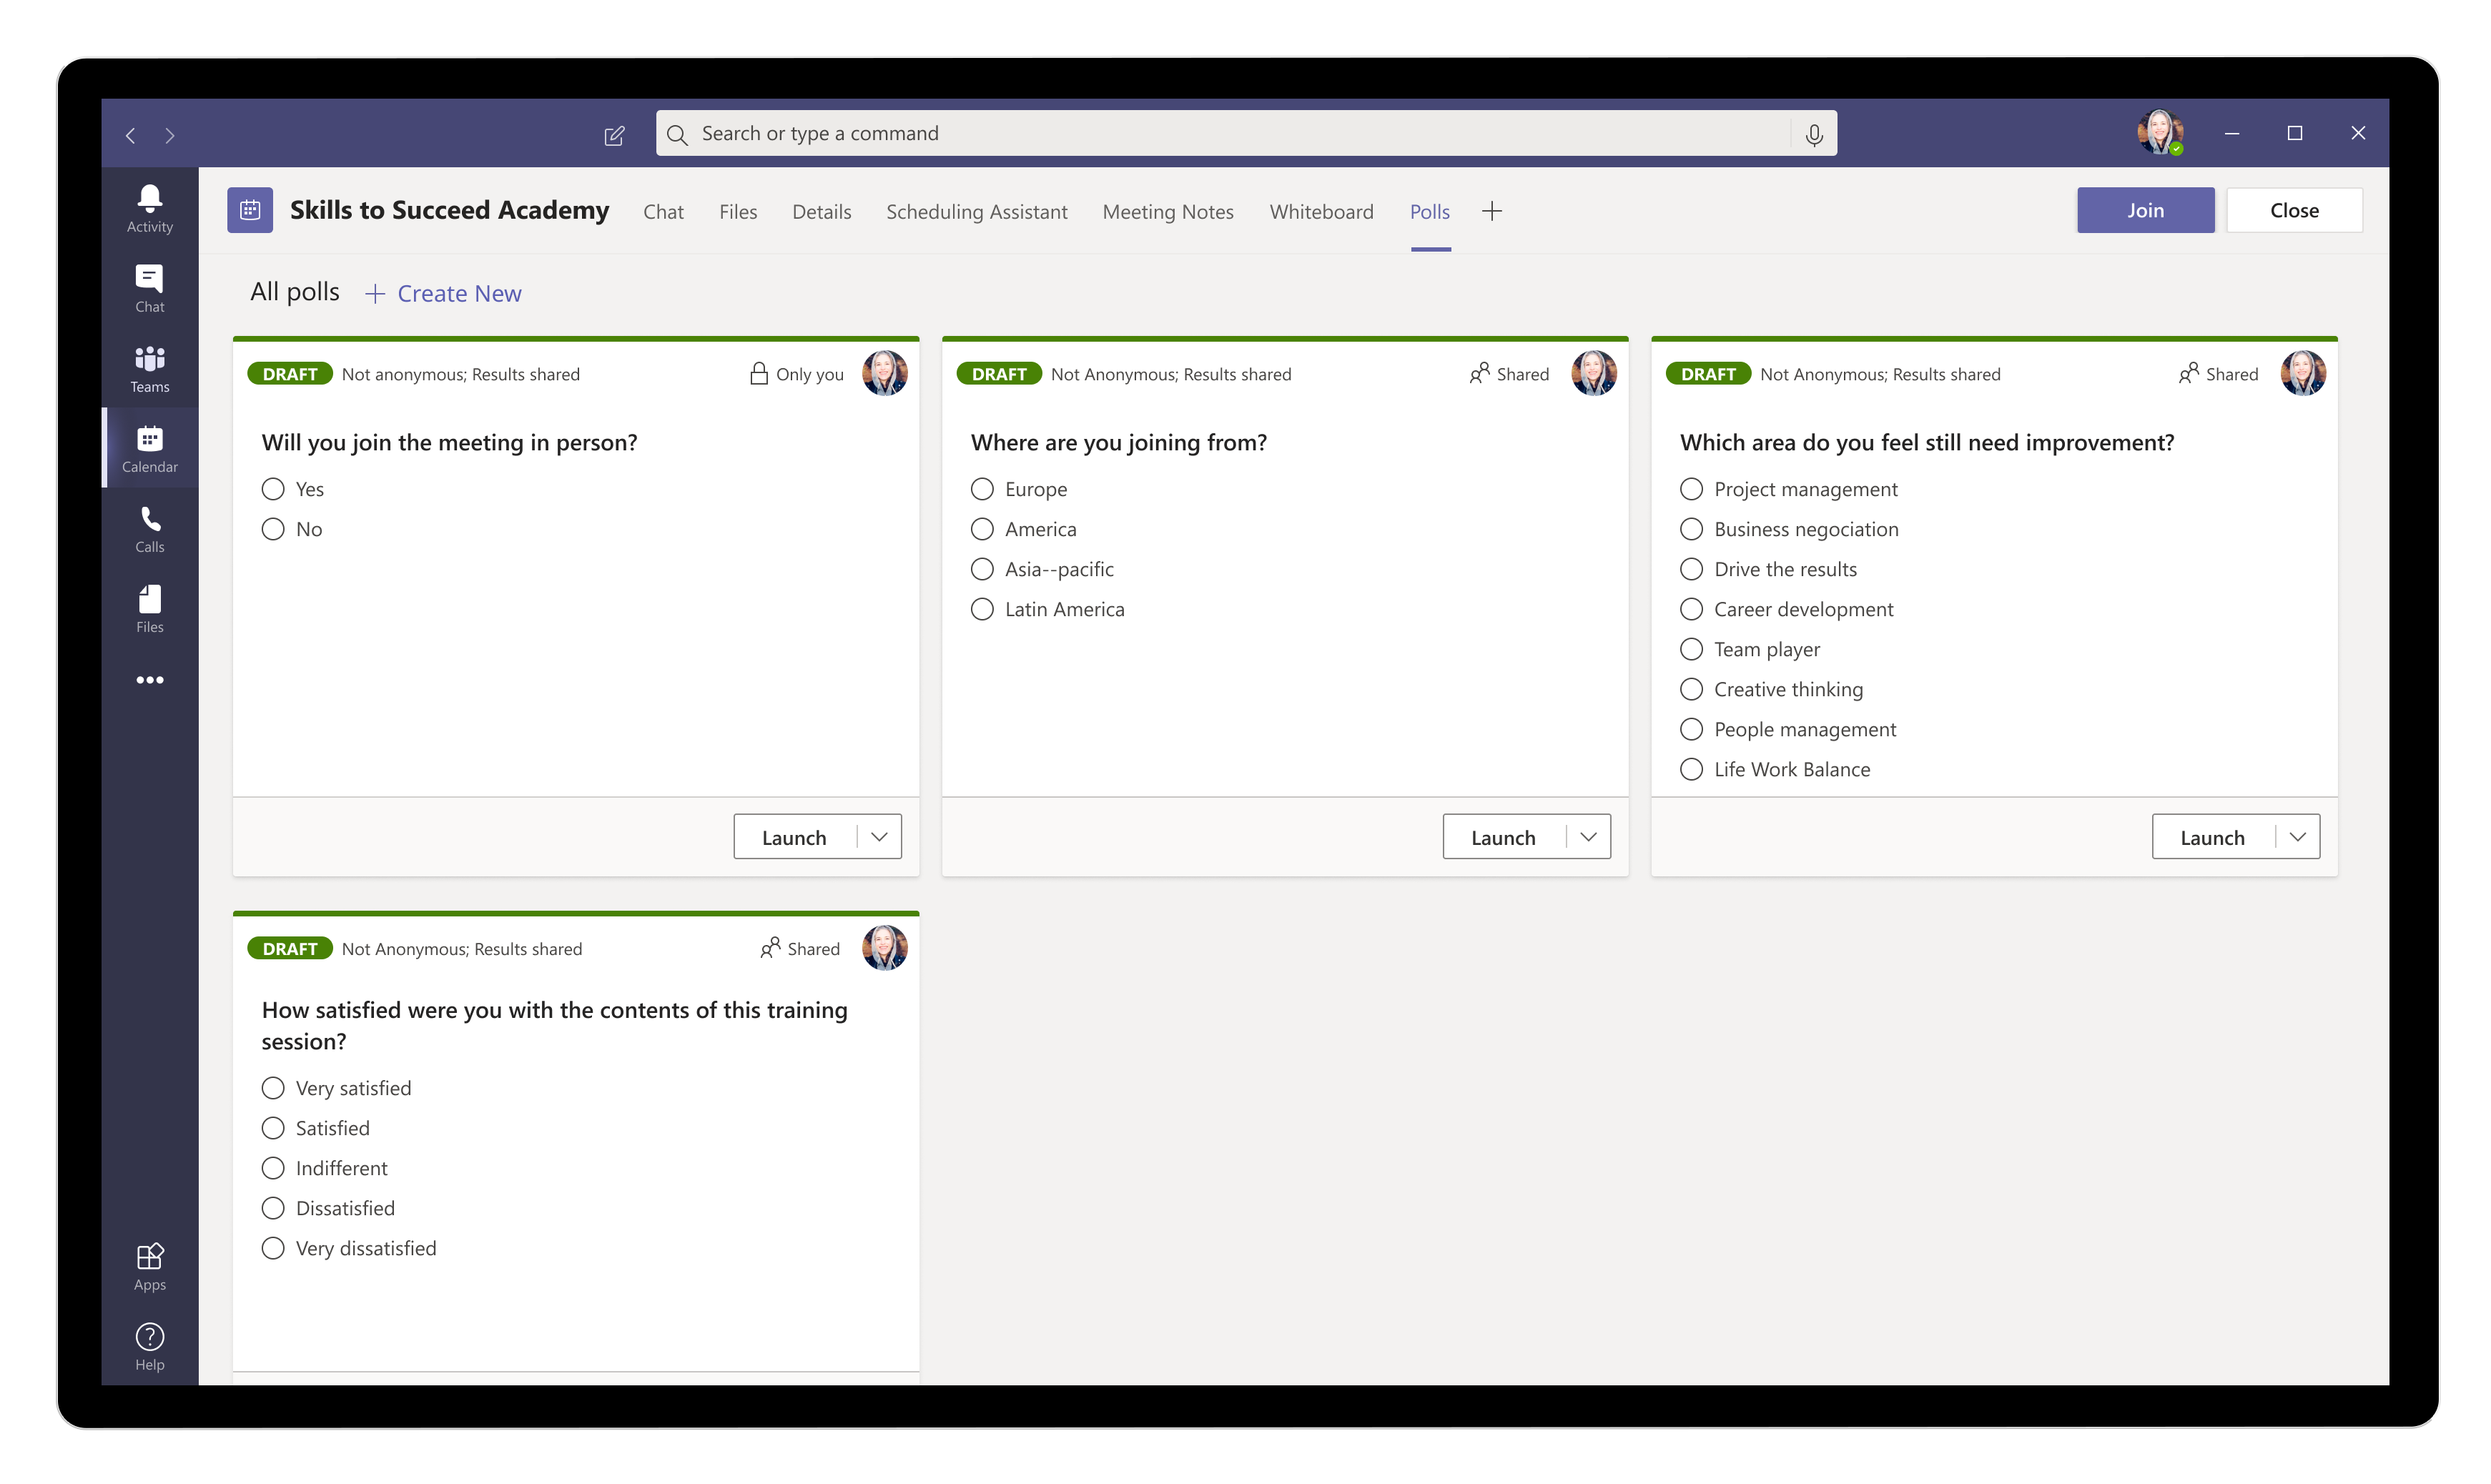 Microsoft Forms integration with Microsoft Teams now brings the power of polls to meetings, here is a sample poll screen.